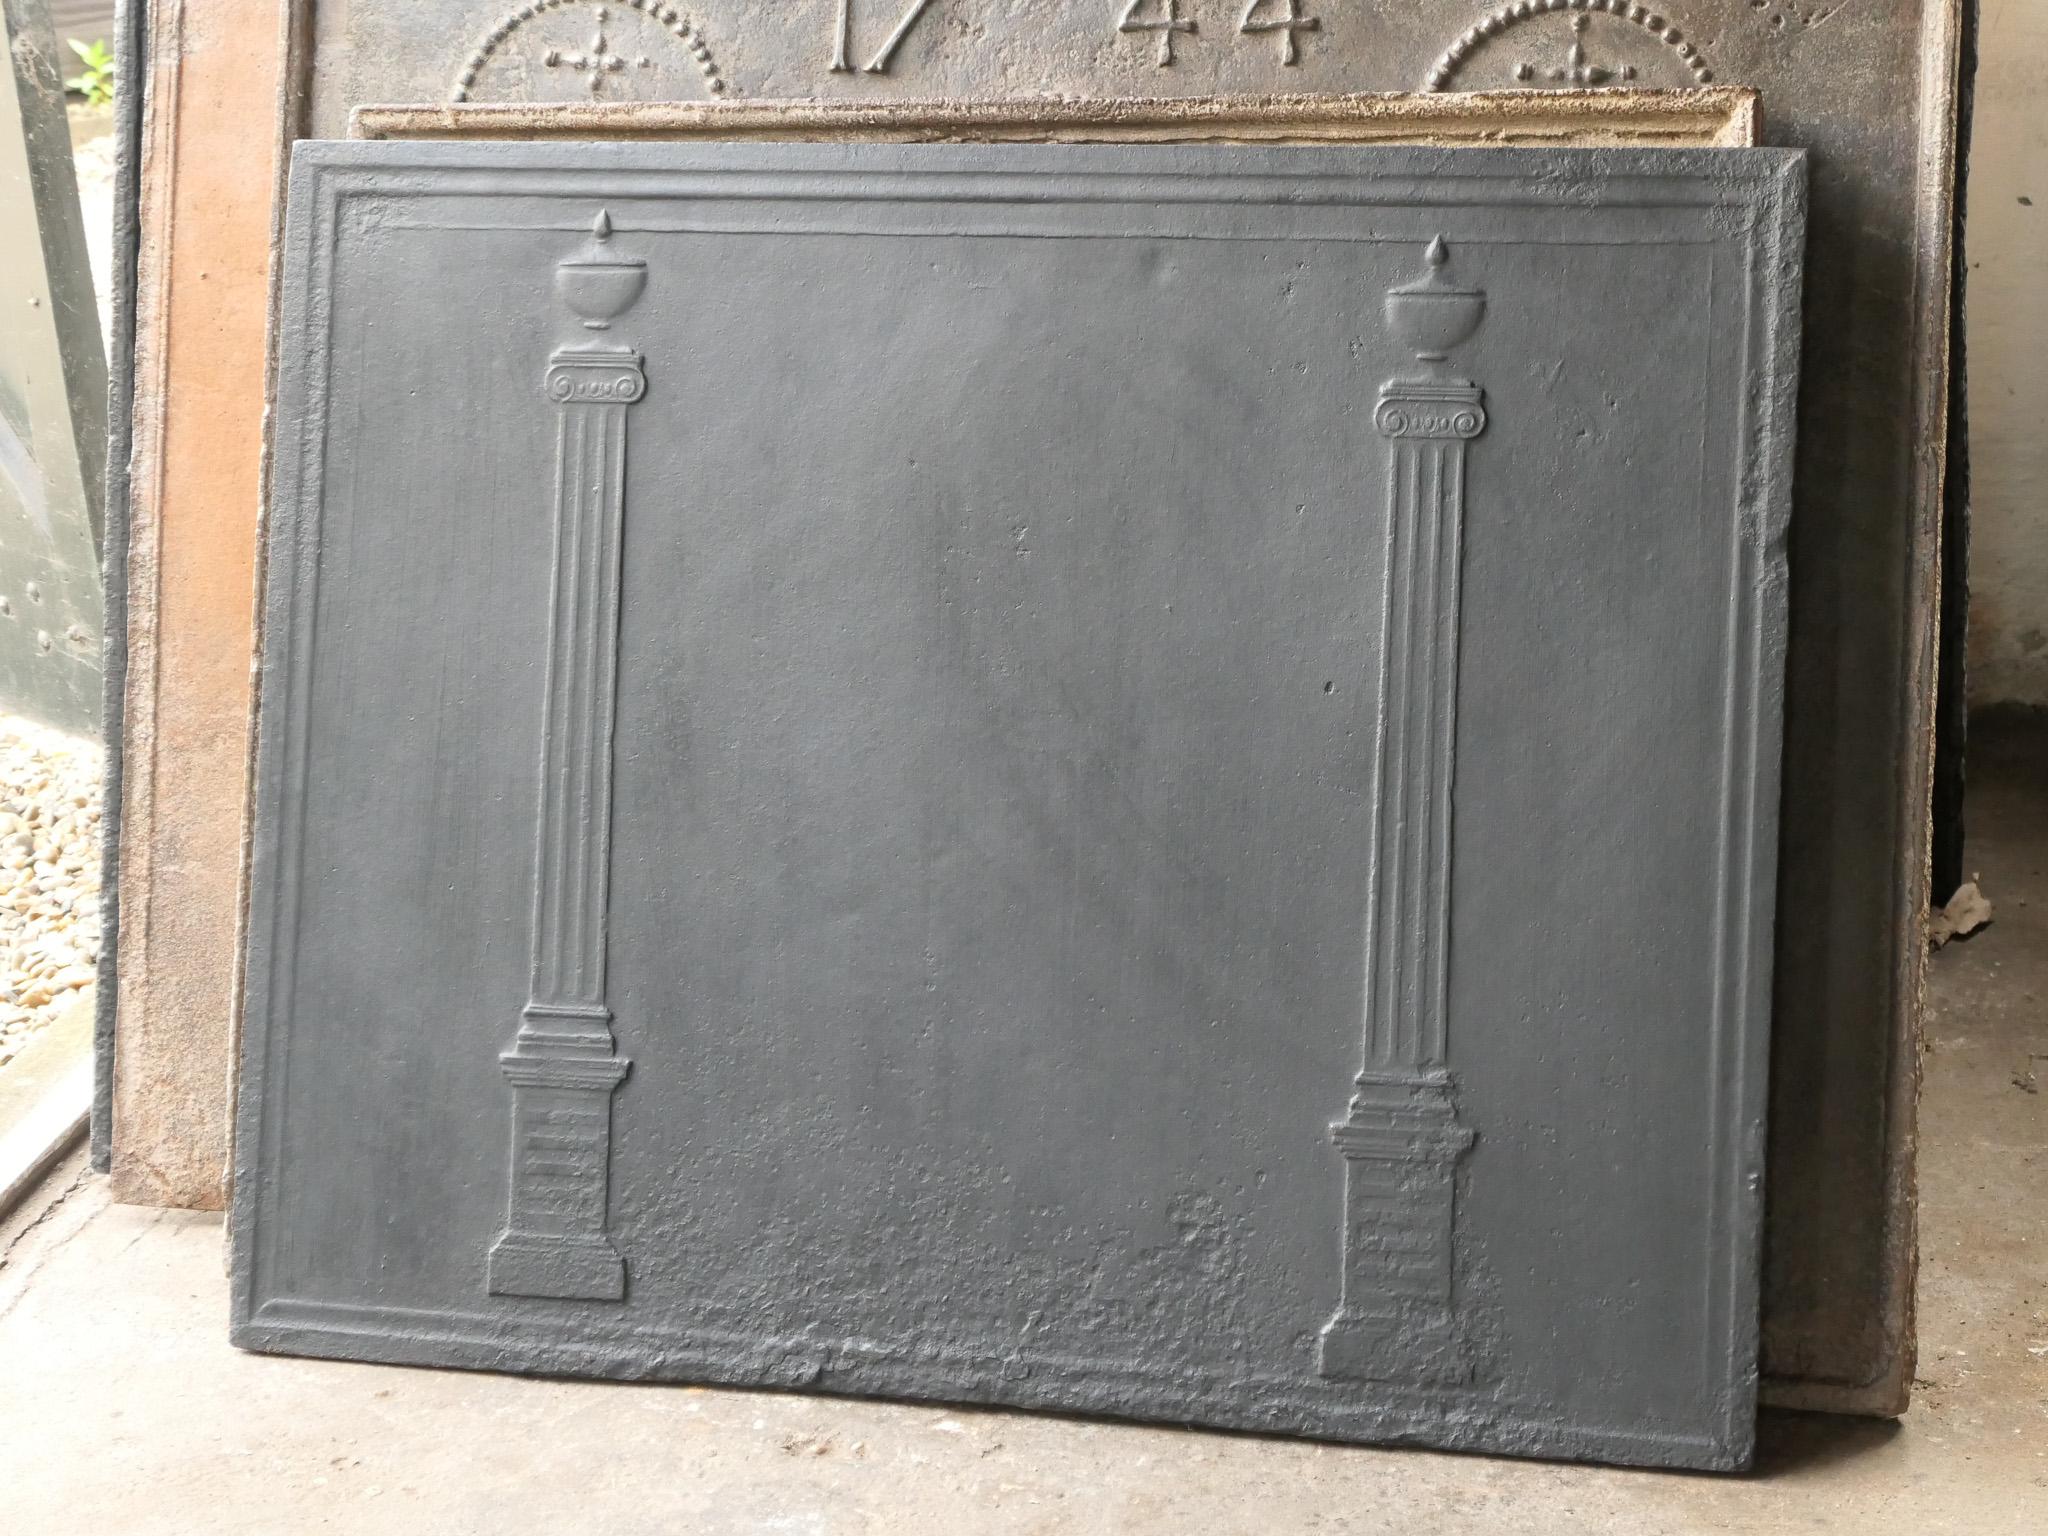 18th - 19th century French neoclassical fireback with two pillars of freedom. The pillars symbolize the value liberty, one of the three values of the French revolution.

The fireback is made of cast iron and has a black / pewter patina. It is in a